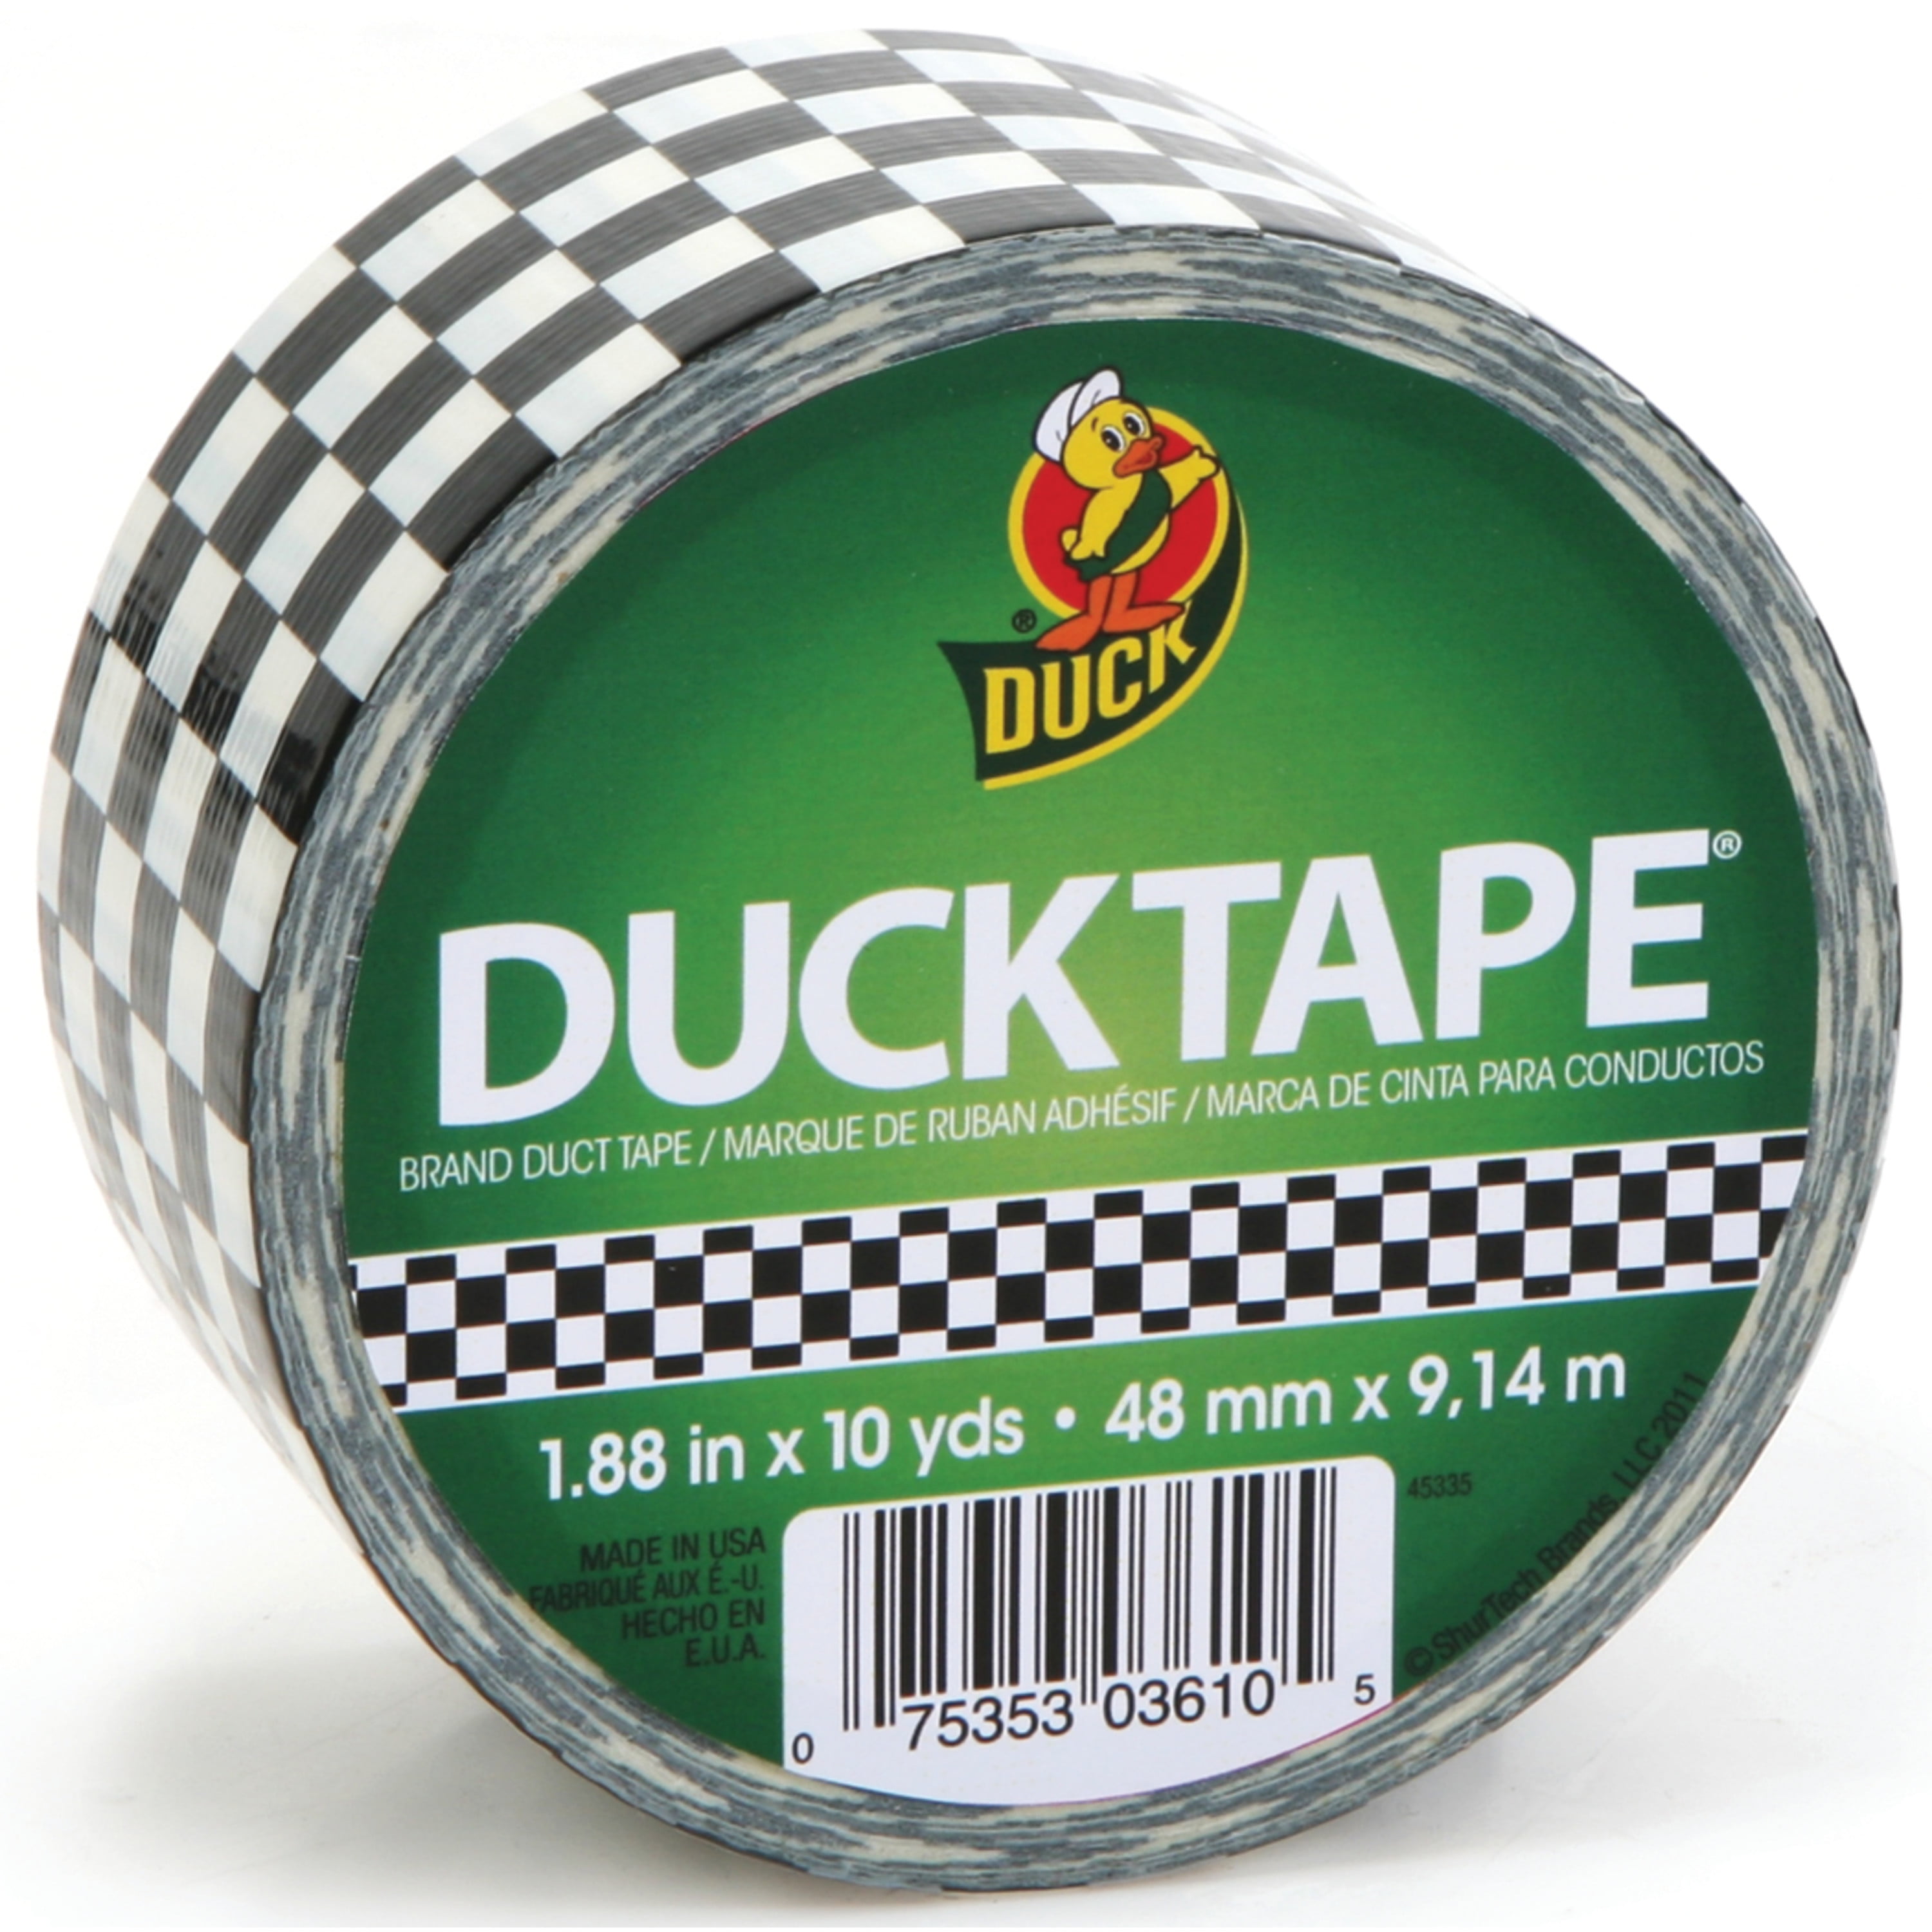 CASE OF 6 MUSTACHE PRINT Duck Duct Tape,10 YD Rolls 280912 FREE SHIPPING!! 